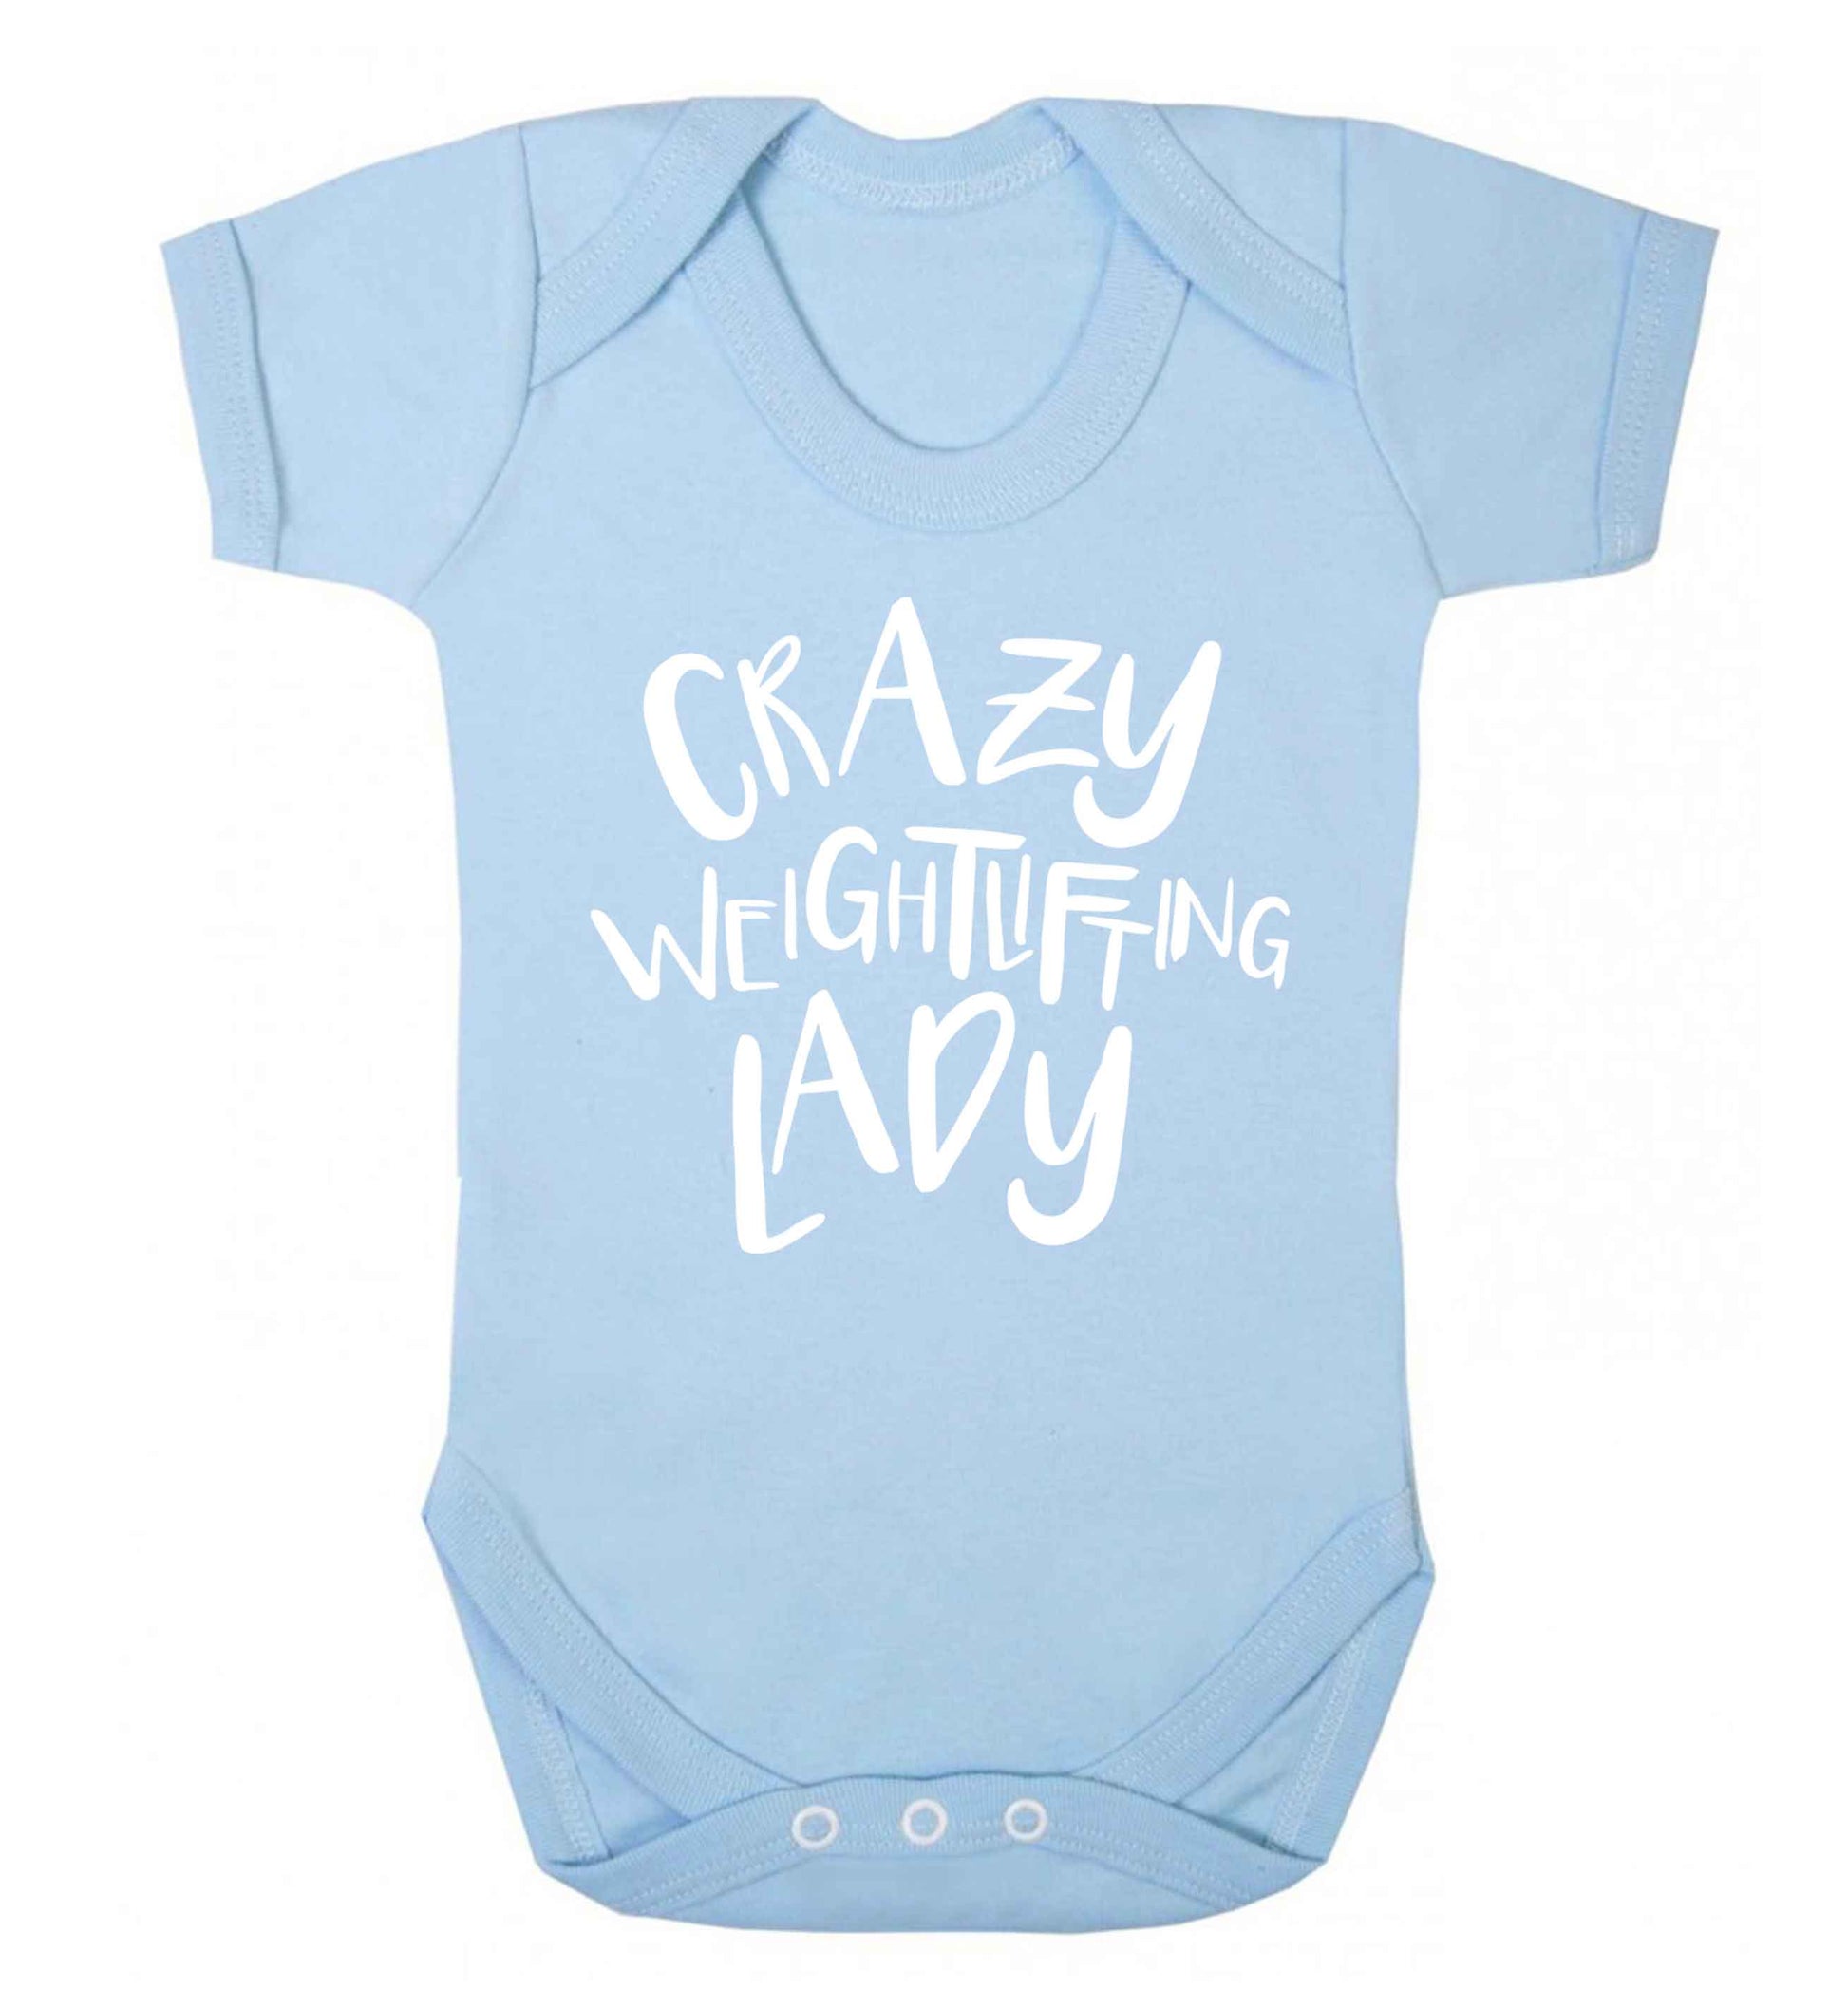 Crazy weightlifting lady Baby Vest pale blue 18-24 months